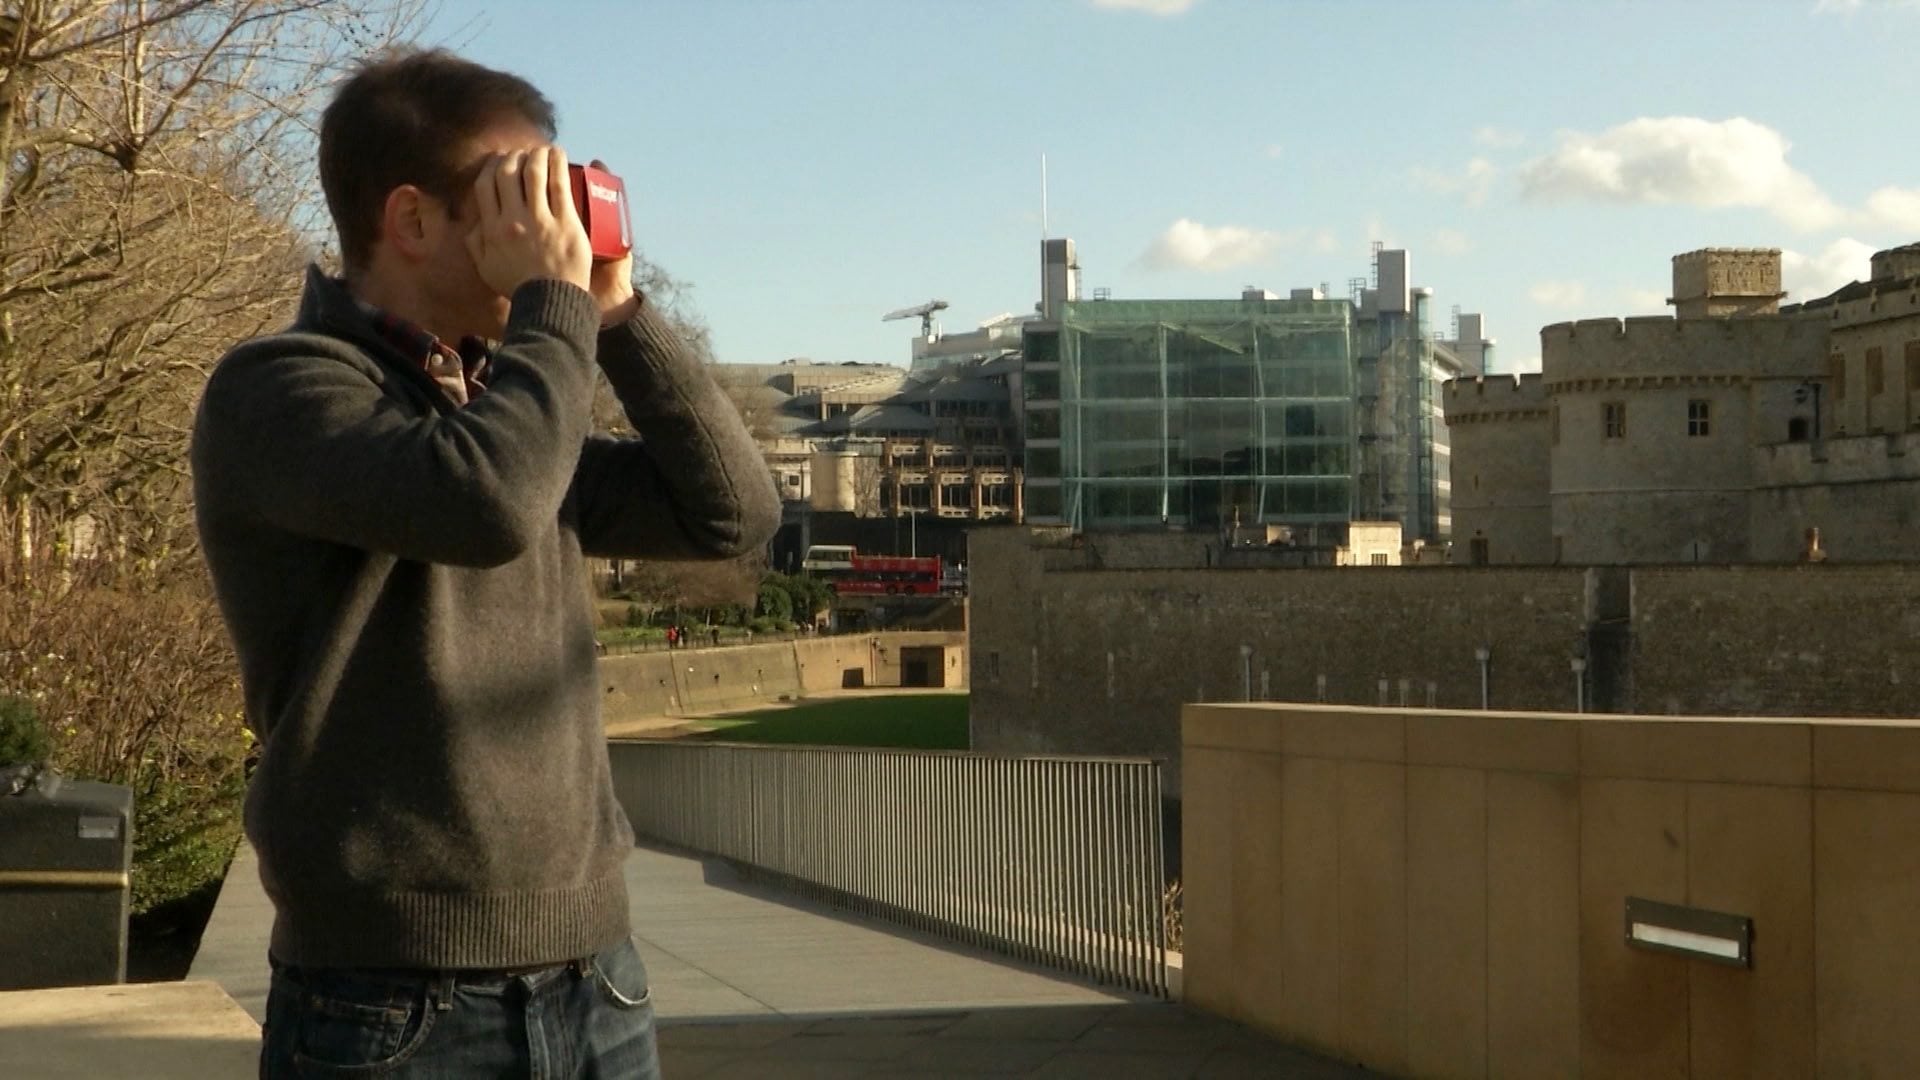 Timelooper co-founder Andrew Feinberg looks through a Google cardboard virtual reality headset across from the Tower of London in London, England, on Feb. 2. The Timelooper app allows users to experience key moments in London history with just a smartphone and a cardboard headset.